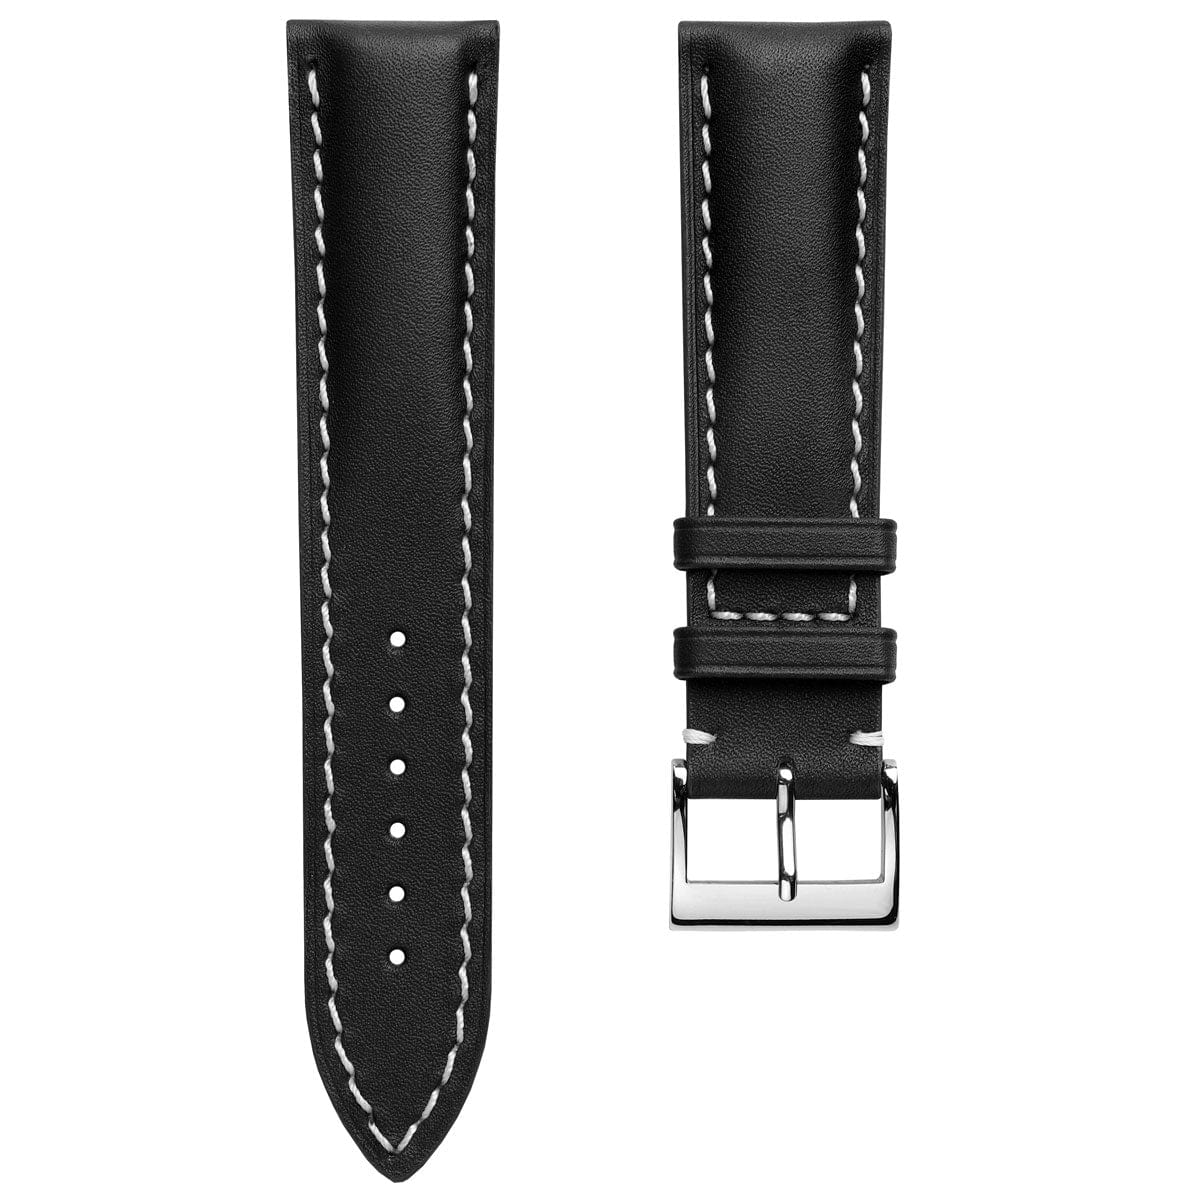 Ostend Baranil Thick Padded Leather Watch Strap - Black